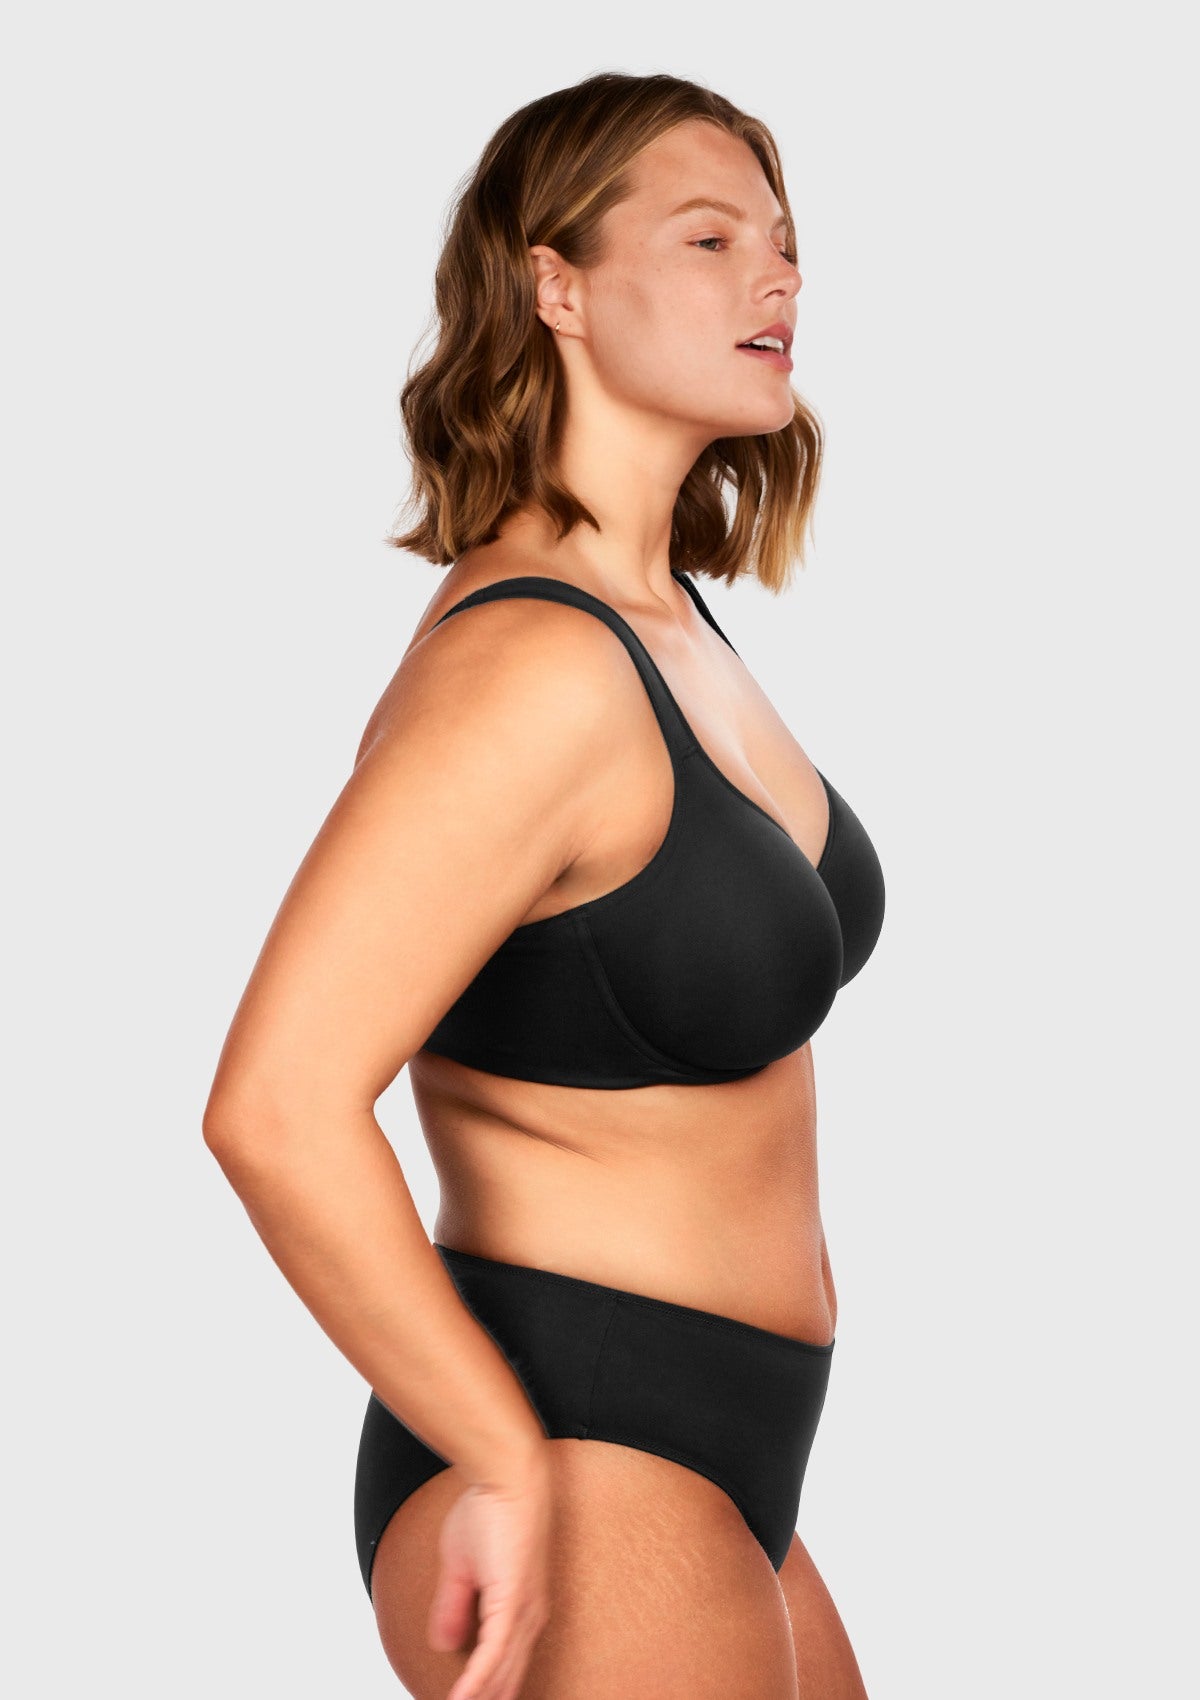 HSIA Joan Soft T-shirt Unlined Non-Padded Soft Cup Minimizer Bra - Black / 40 / D